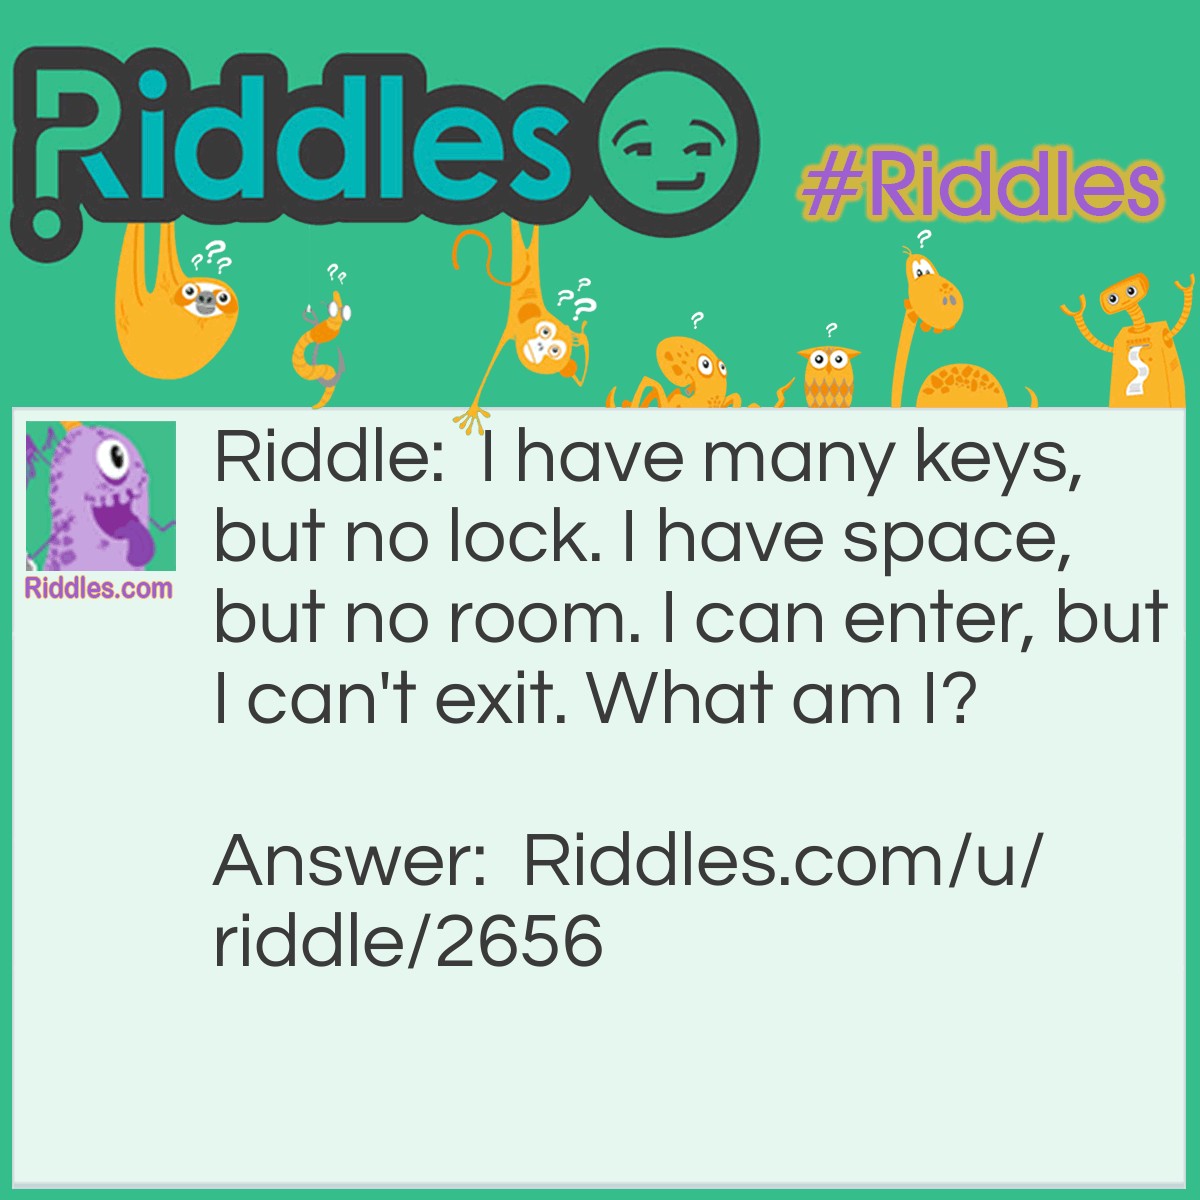 Riddle: I have many keys, but no lock. I have space, but no room. I can enter, but I can't exit. What am I? Answer: A keyboard.